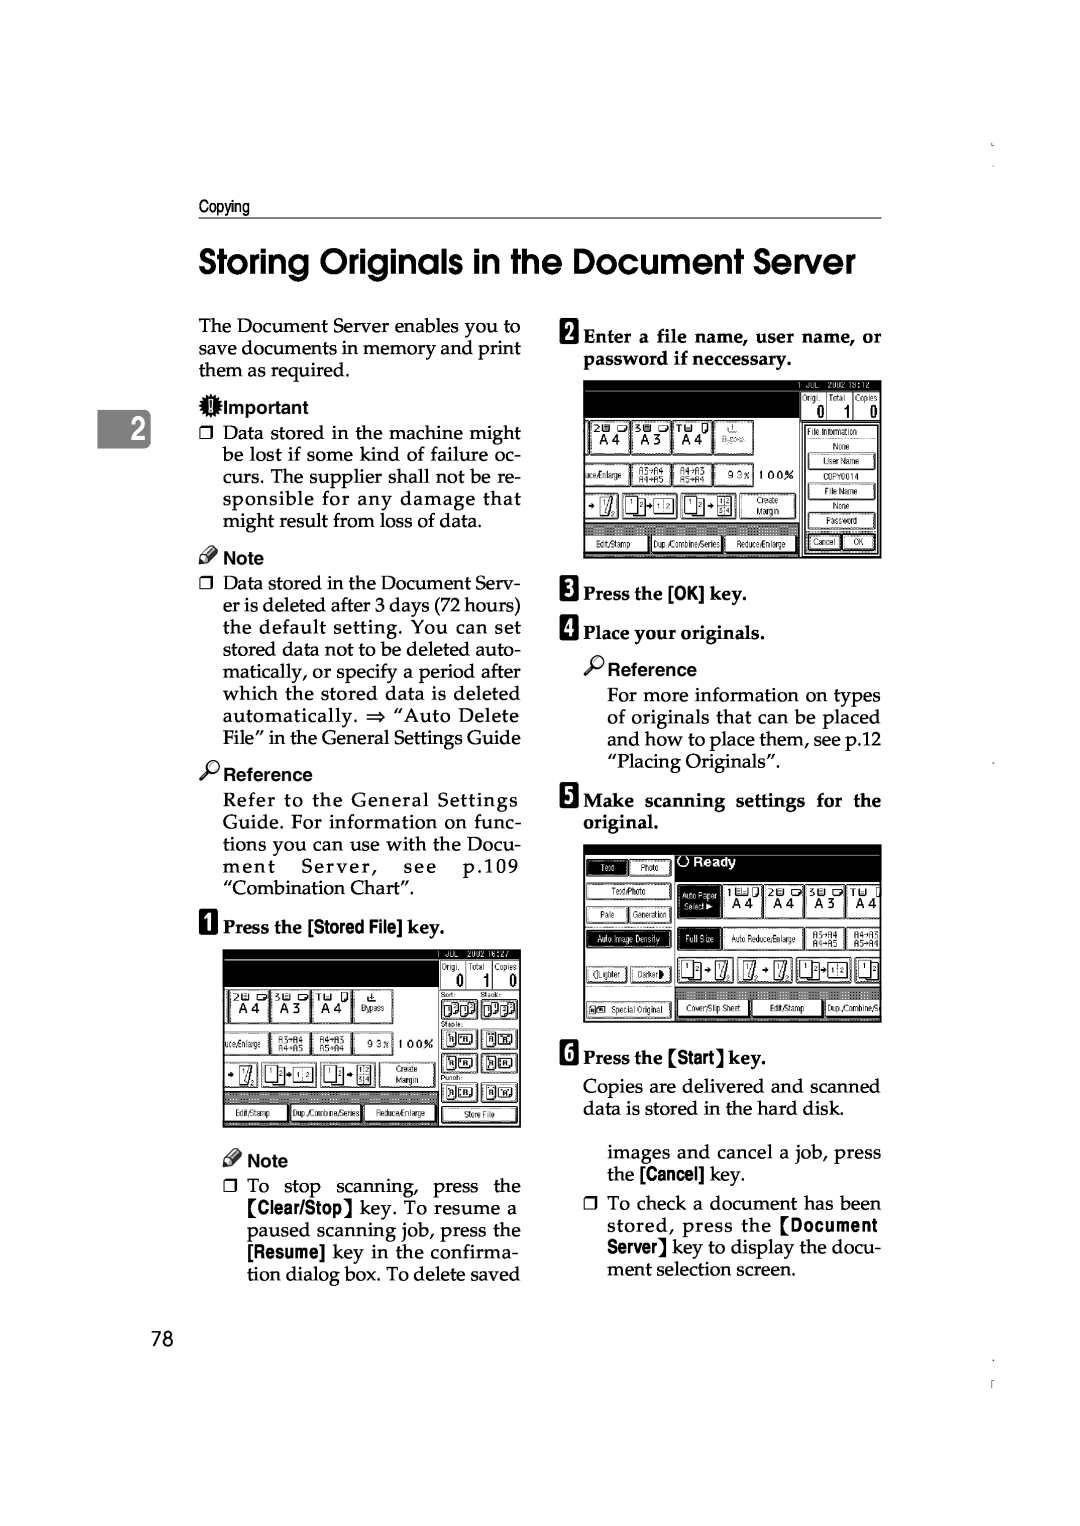 Lanier LD075, LD060 manual Storing Originals in the Document Server, A Press the Stored File key, Reference 